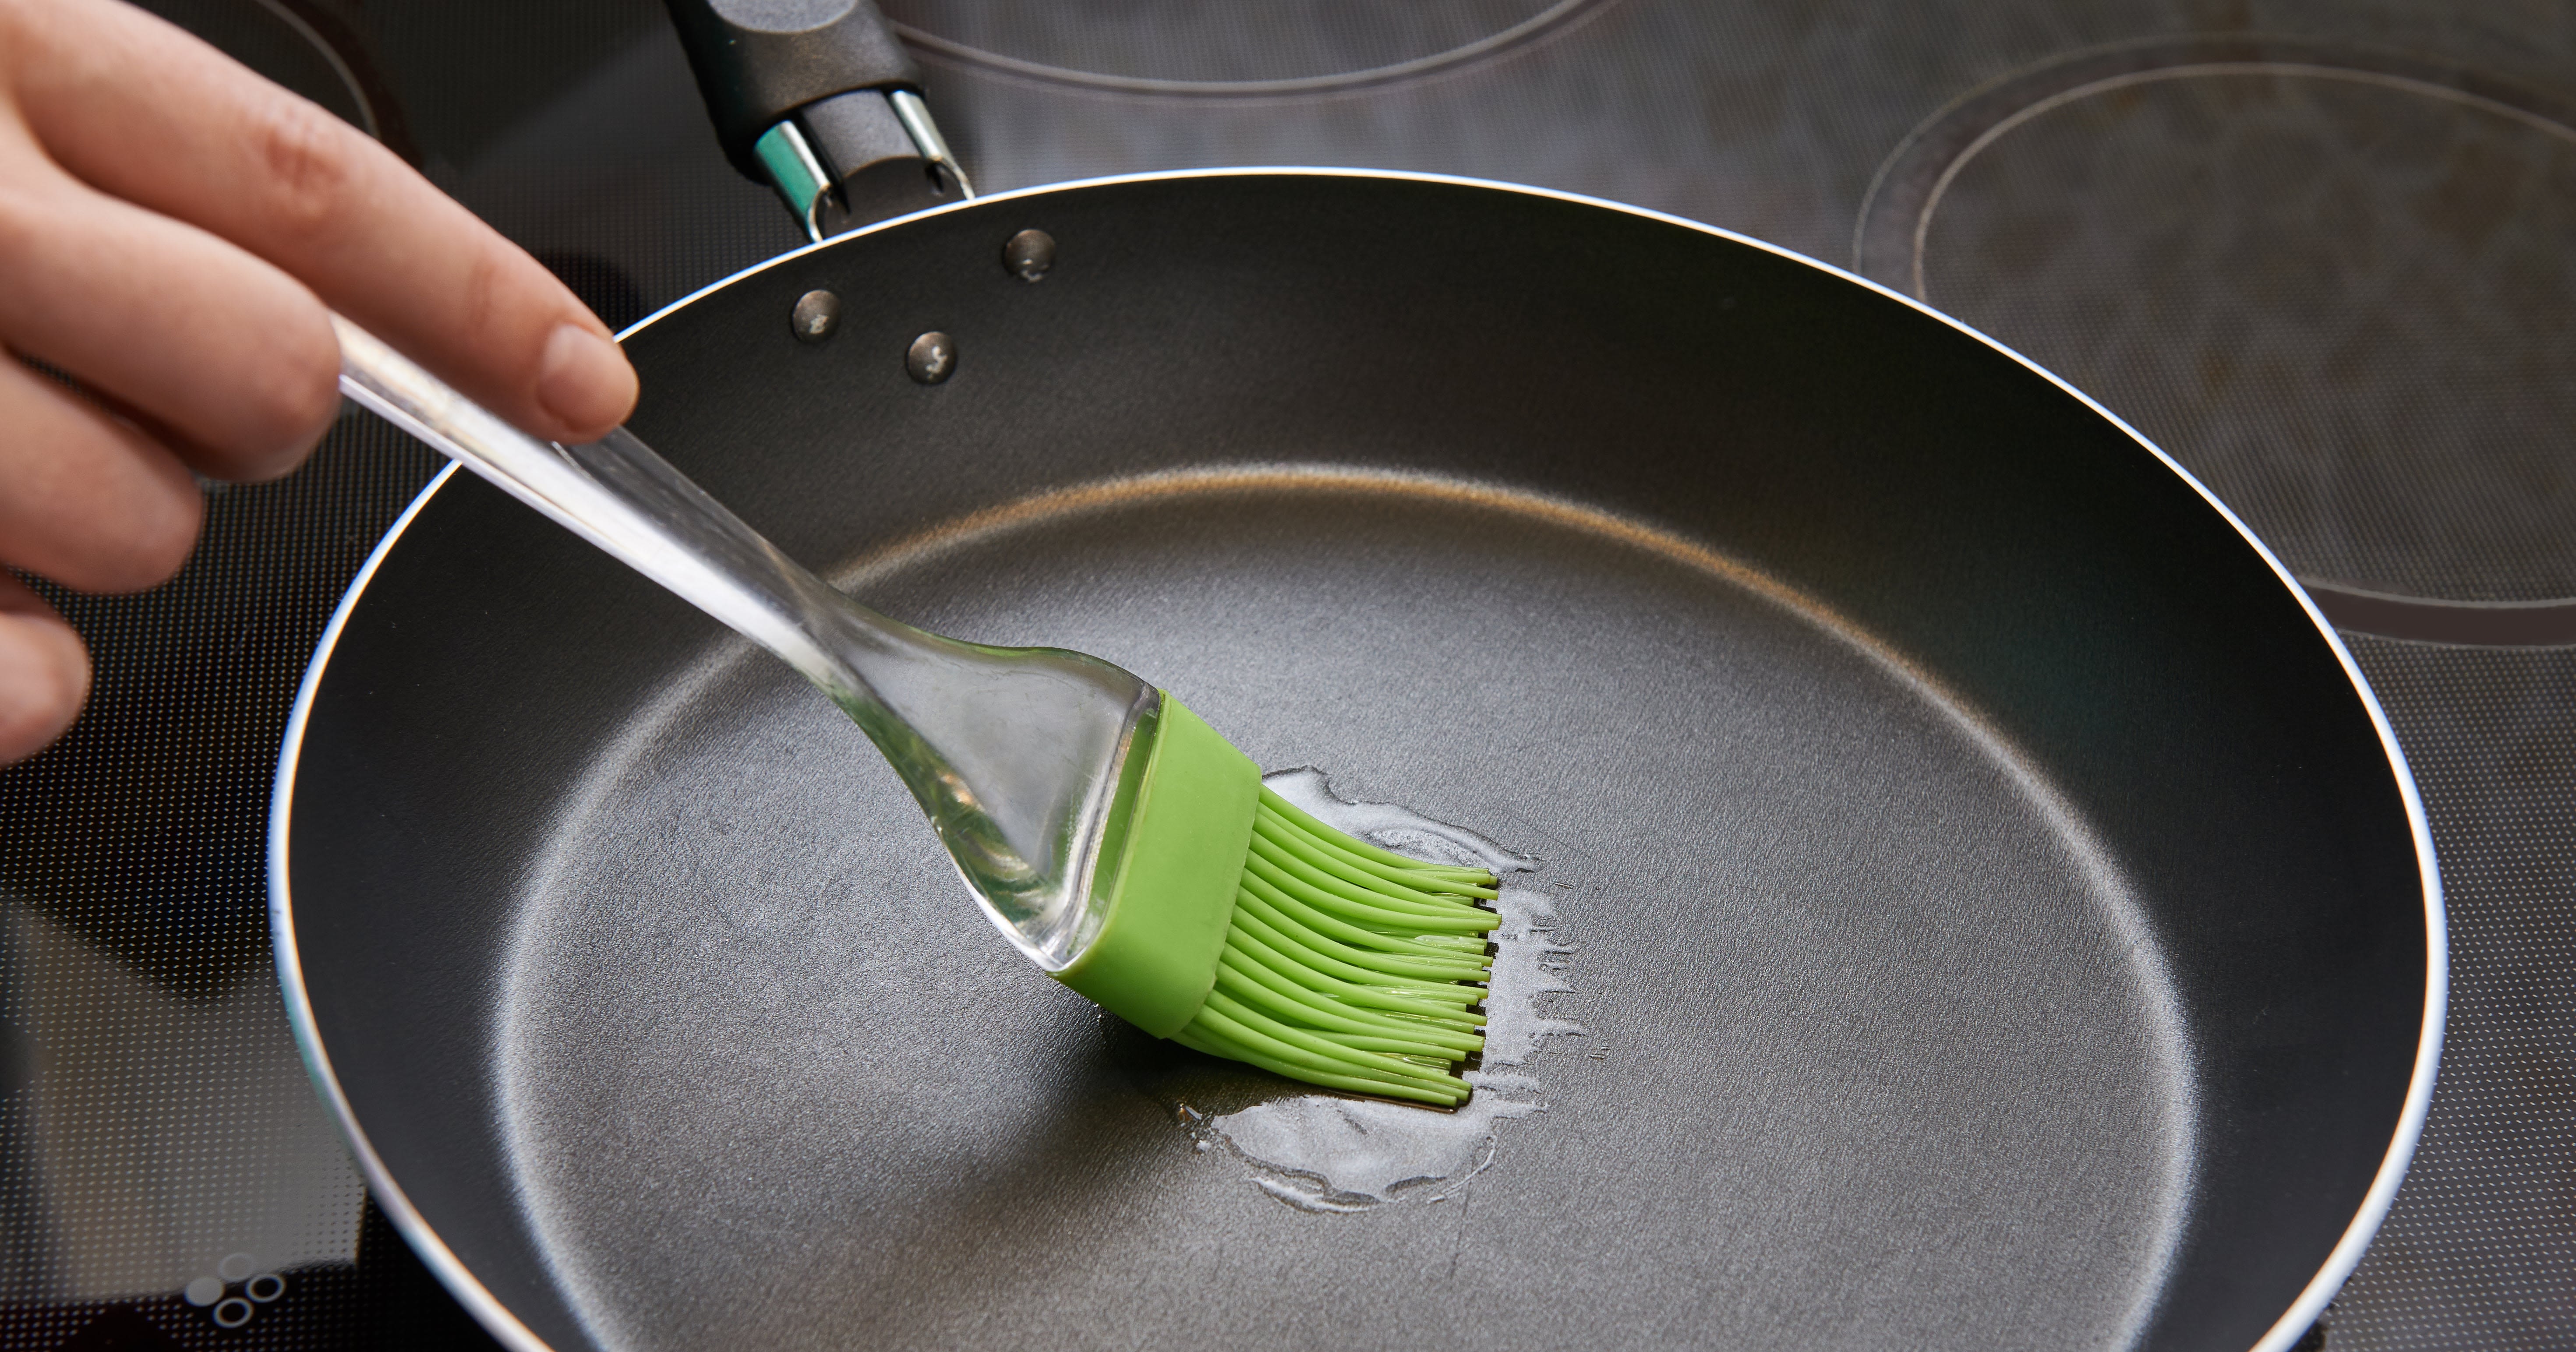 Teflon Flu Is Rising in the US. Should You Be Concerned About Your Nonstick Pans?